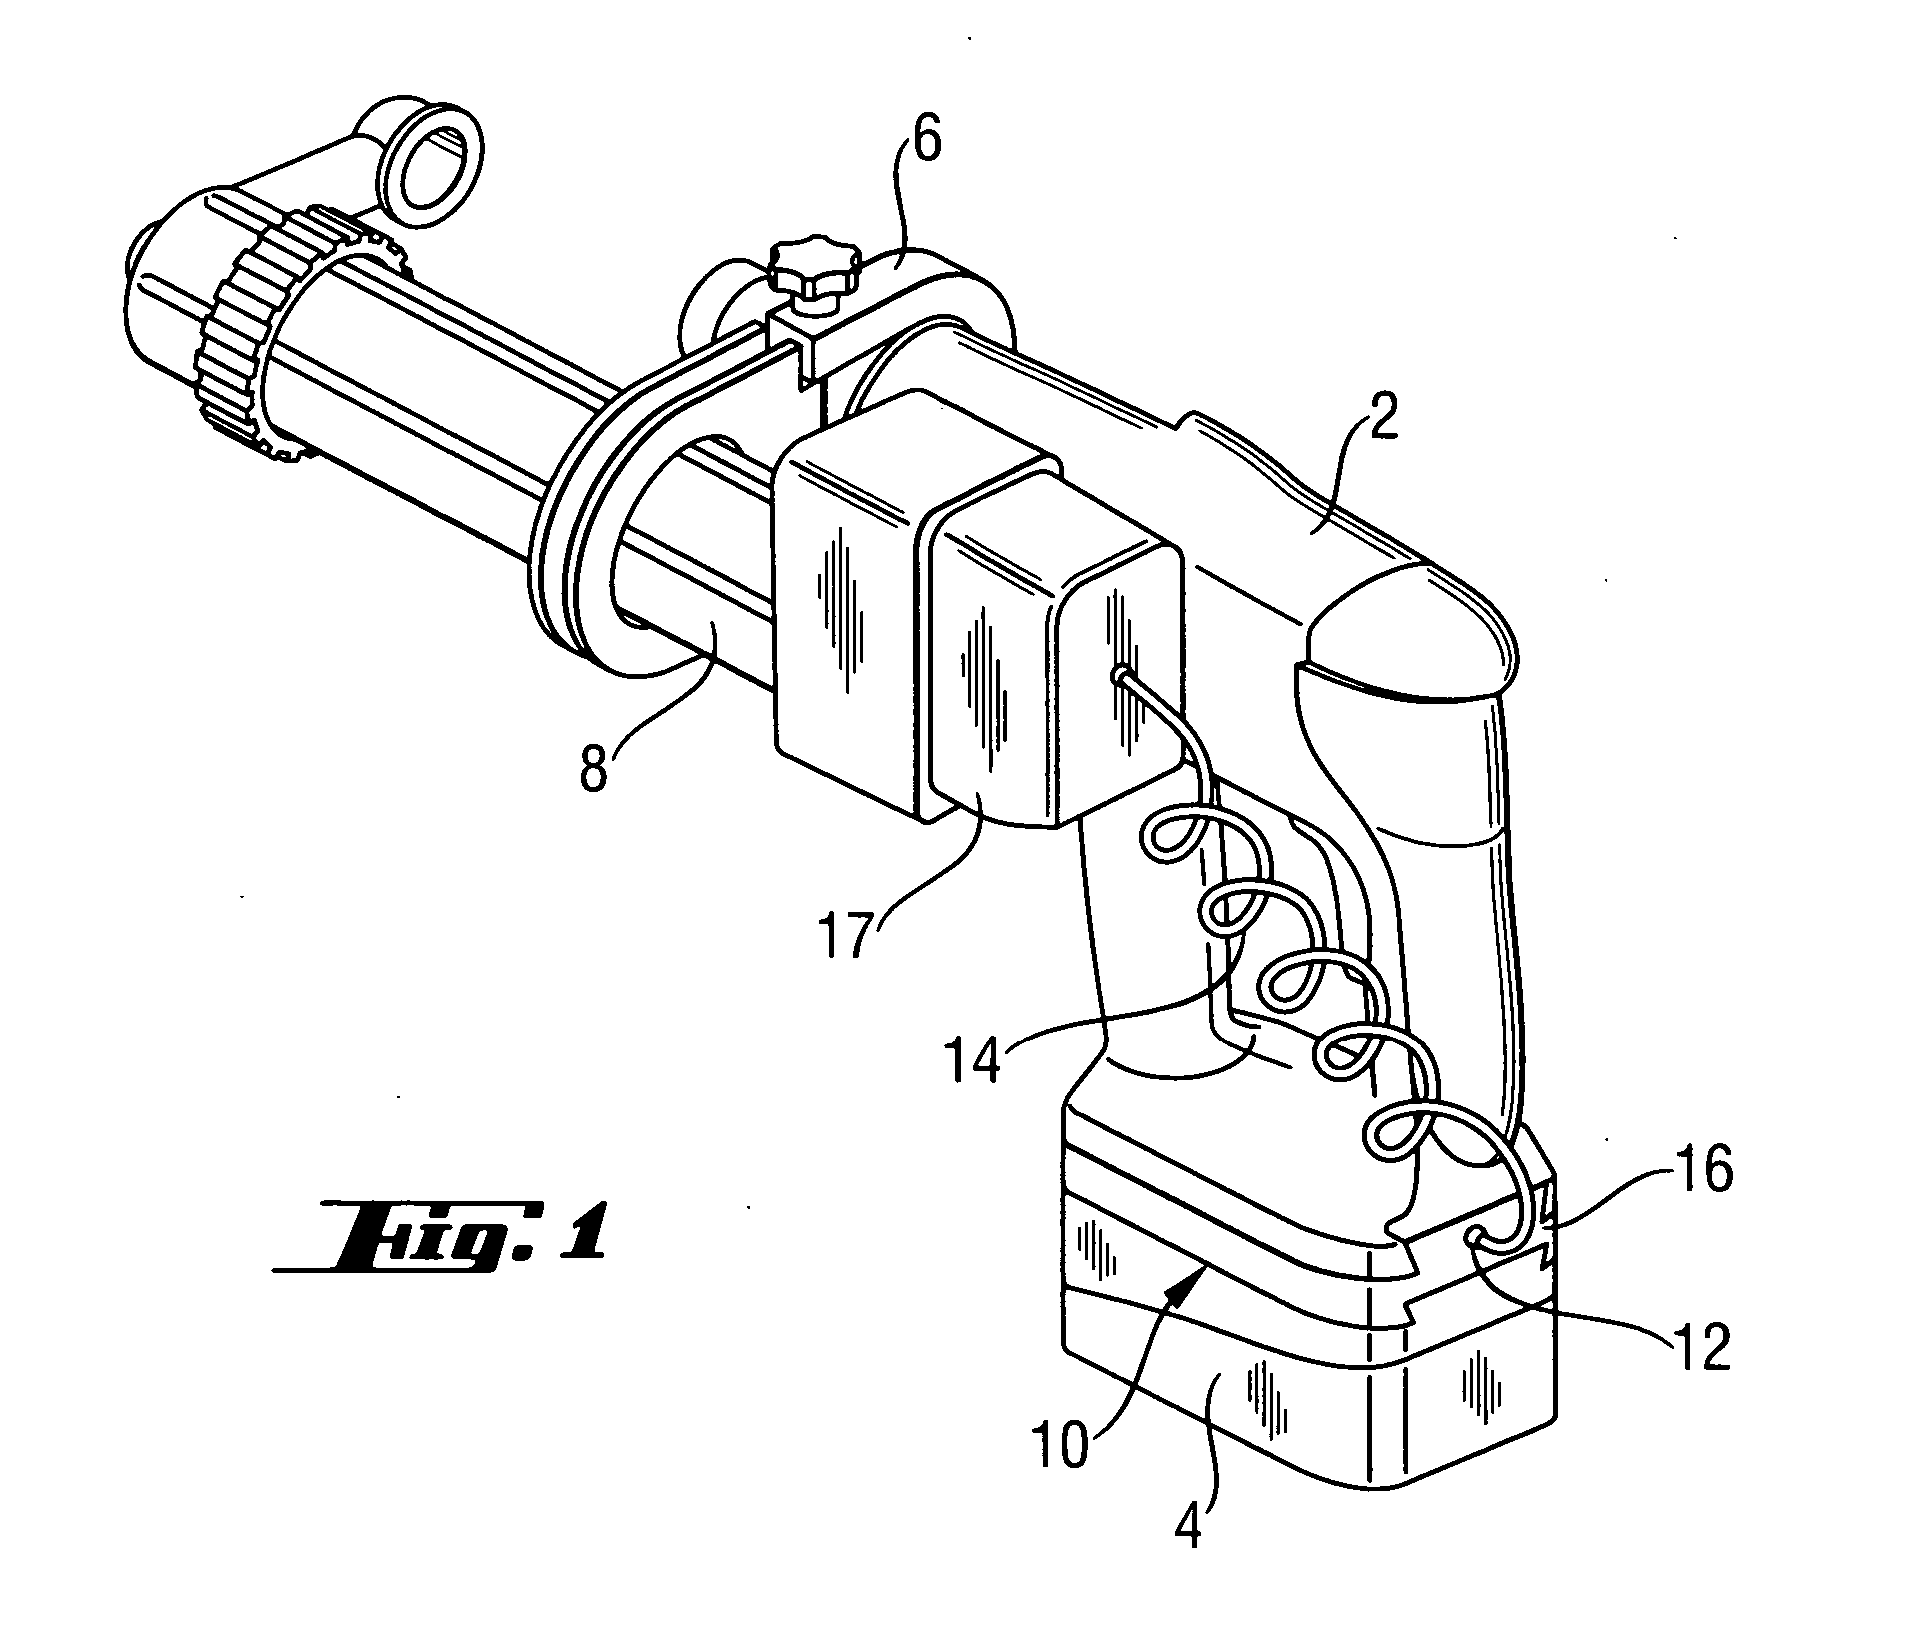 Electrical connection arrangement for hand-held tools with auxiliary devices